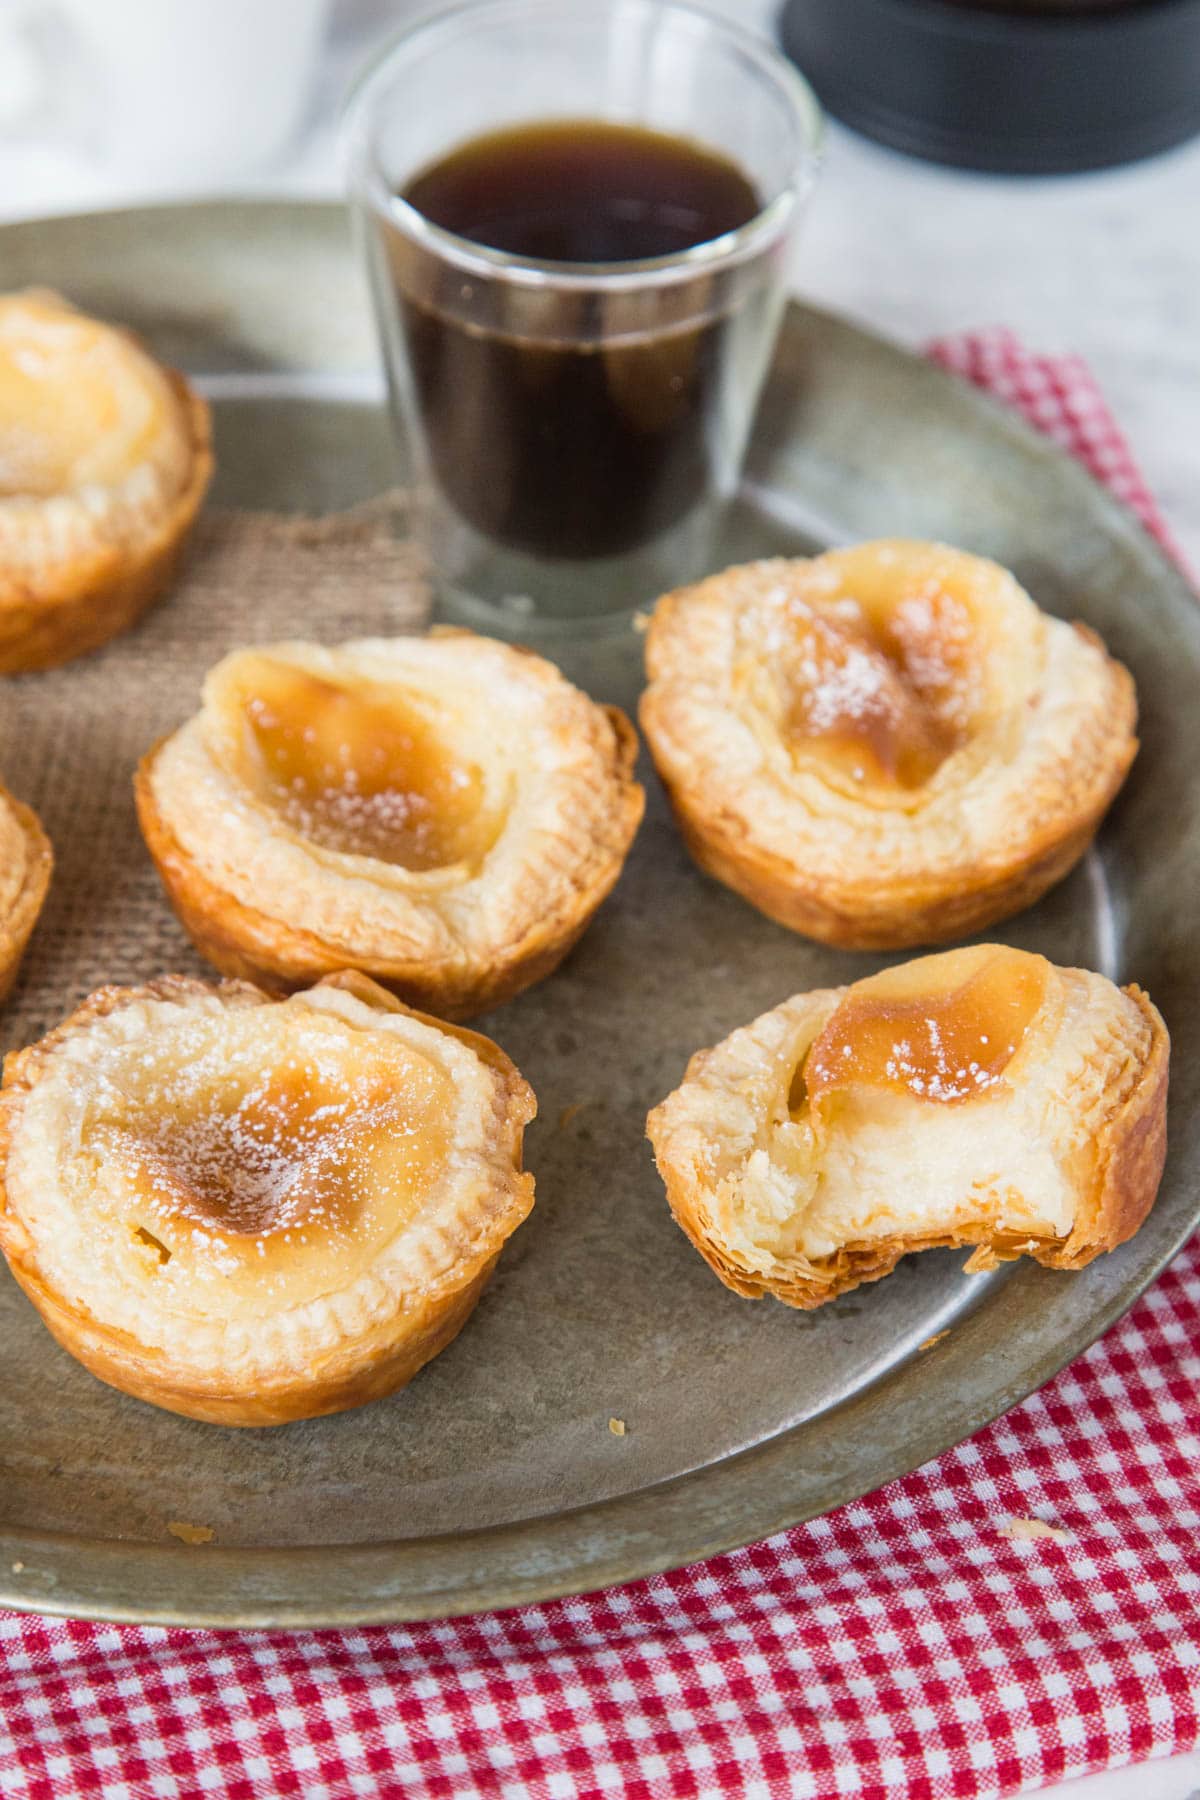 Golden and flaky, these Portuguese custard tarts are irresistible served with strong coffee.